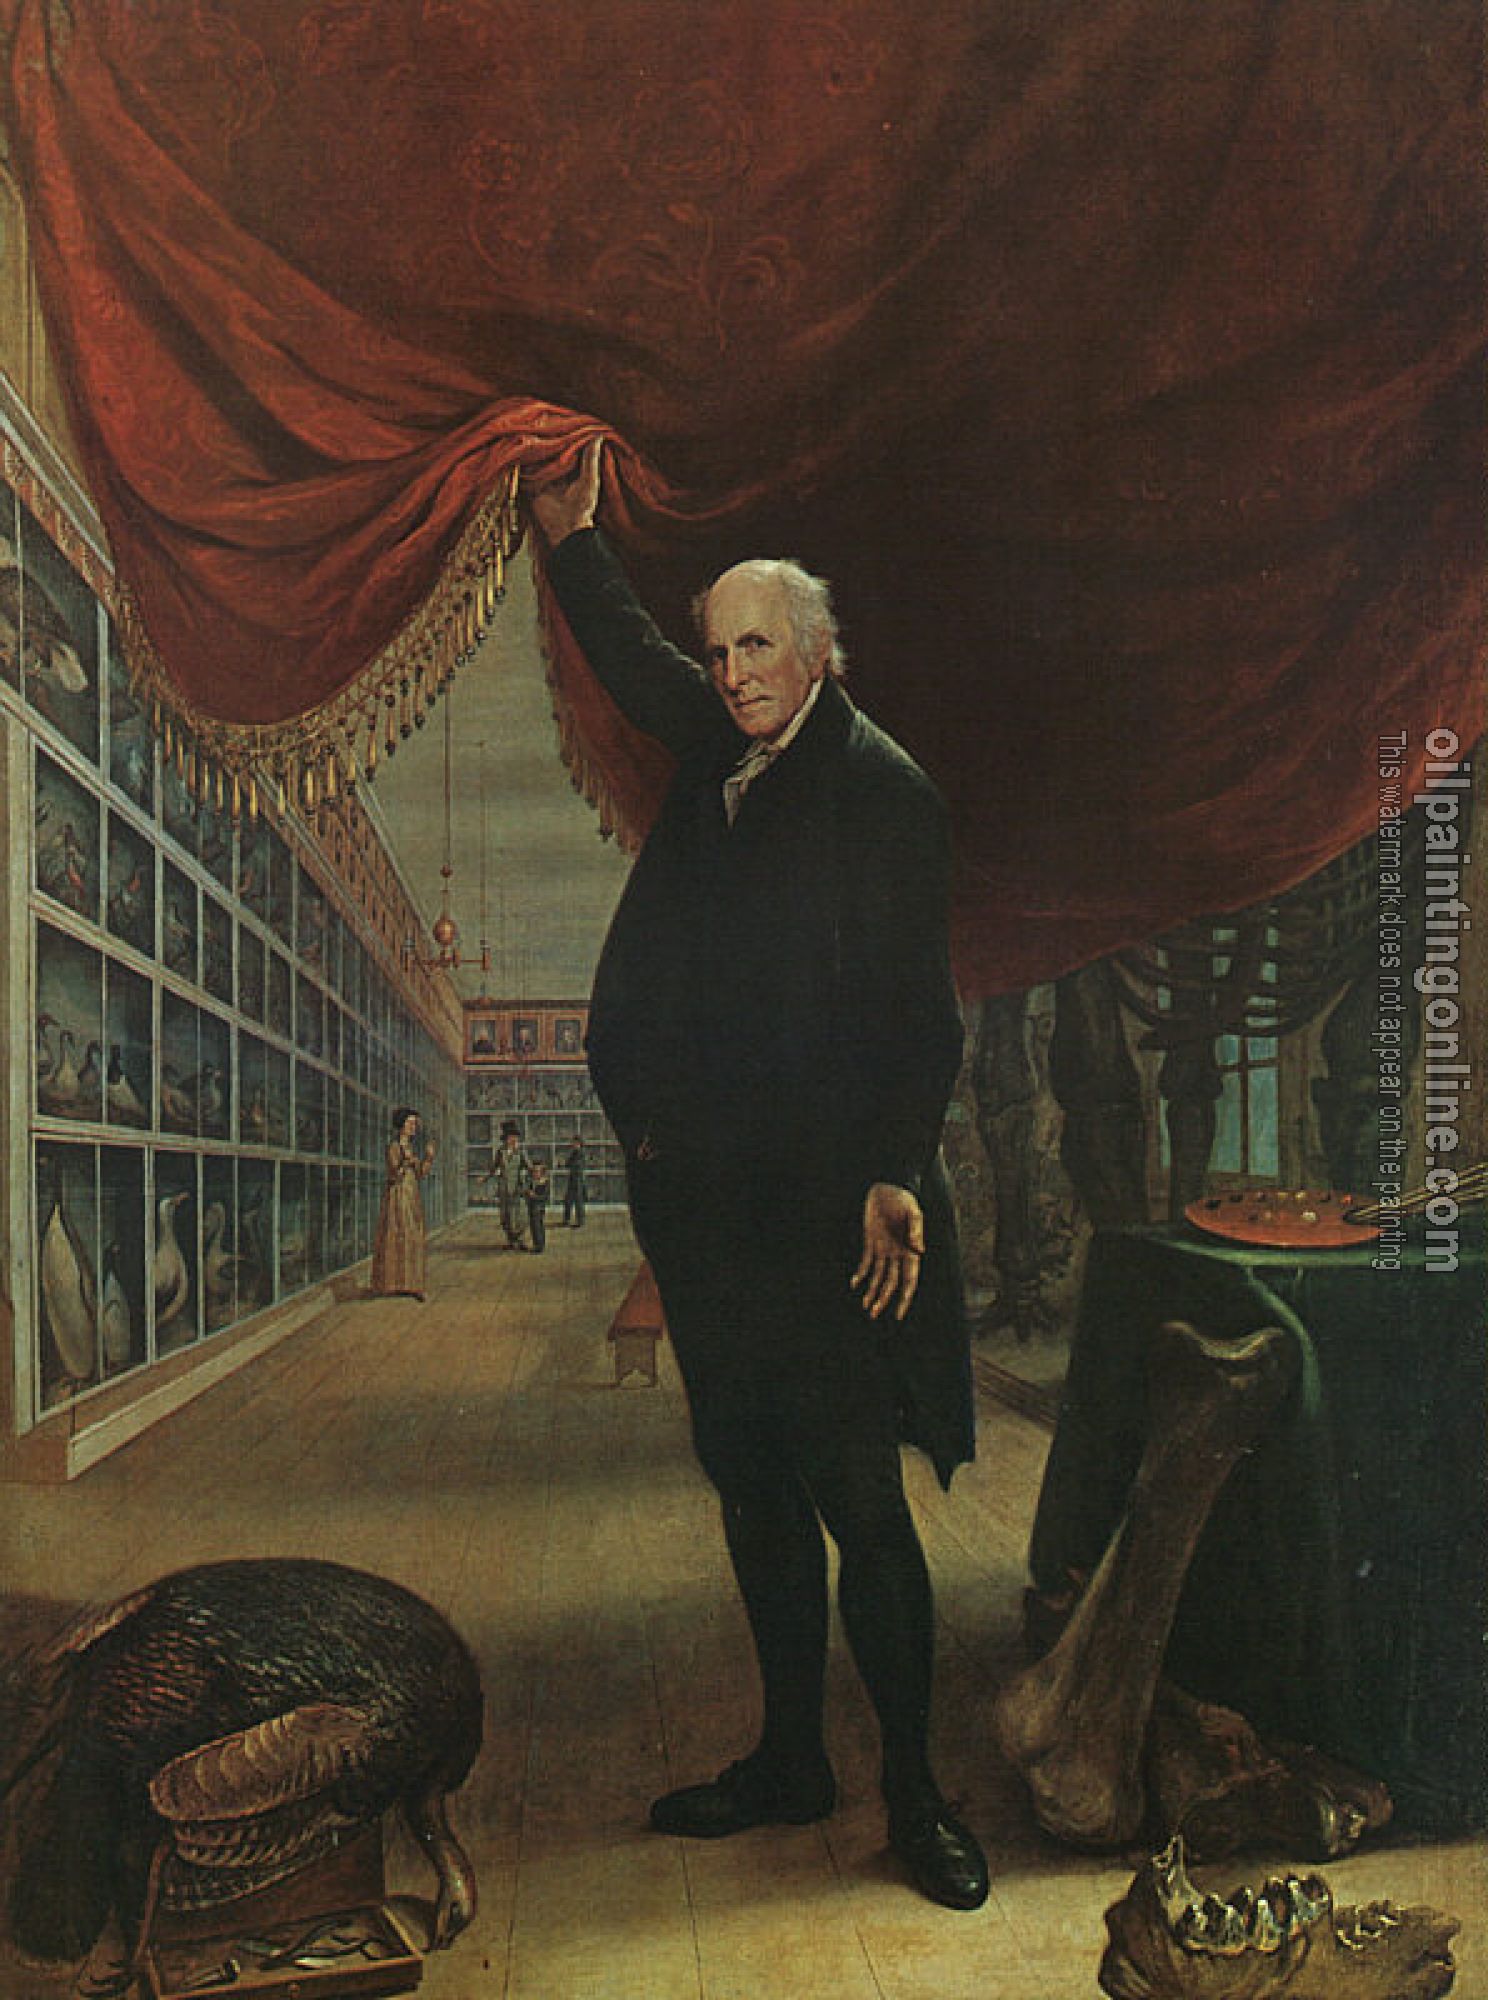 Peale, Charles Willson - The Artist in his Museum, 1822, Pennsylvania Academy of the Fine Arts